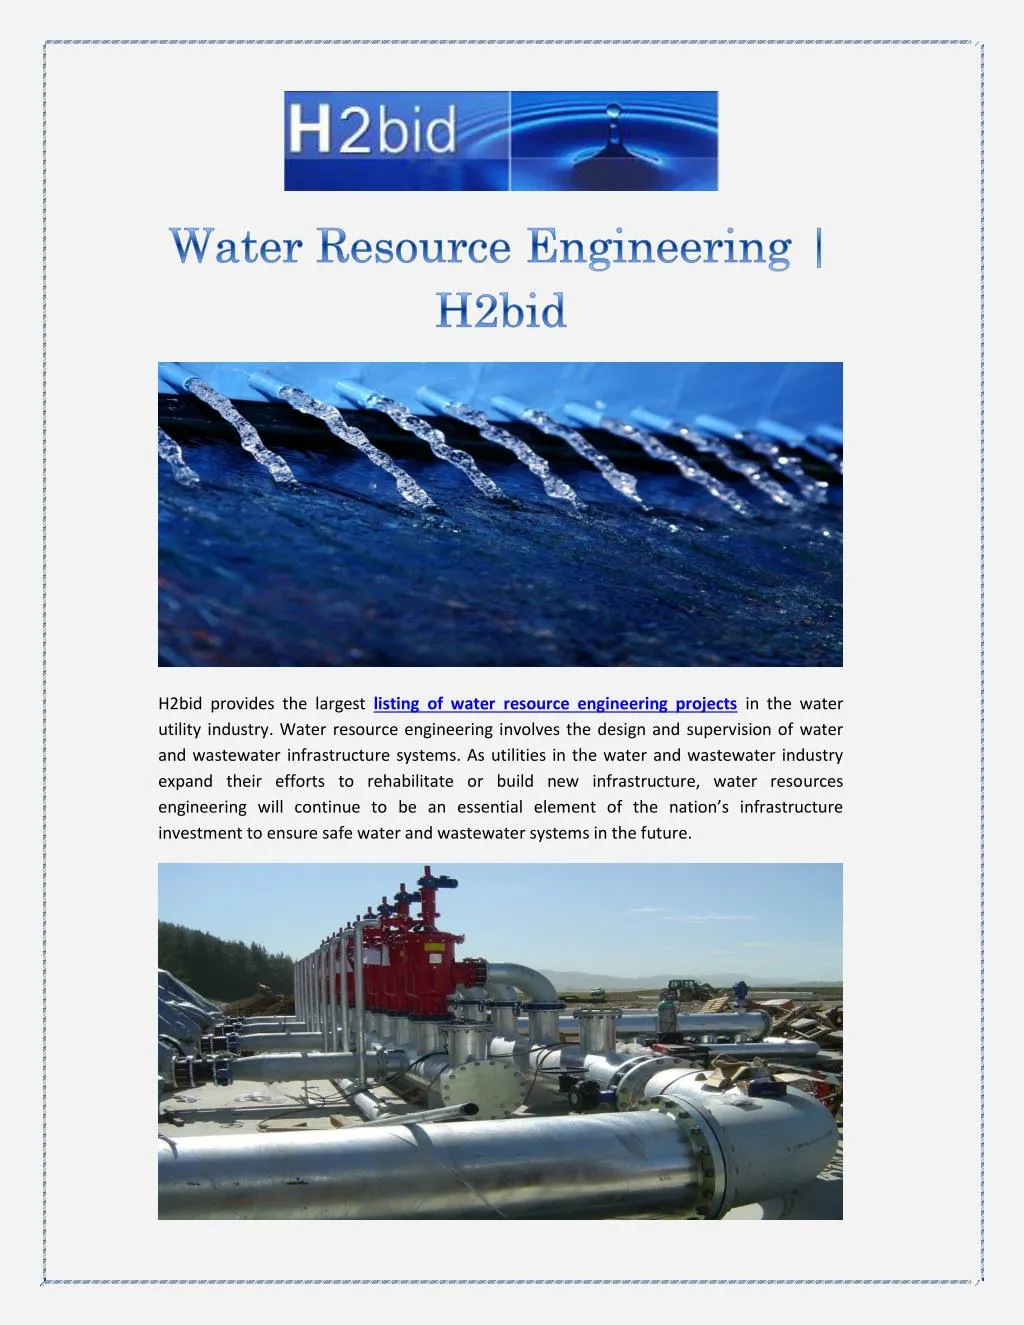 h2bid provides the largest listing of water